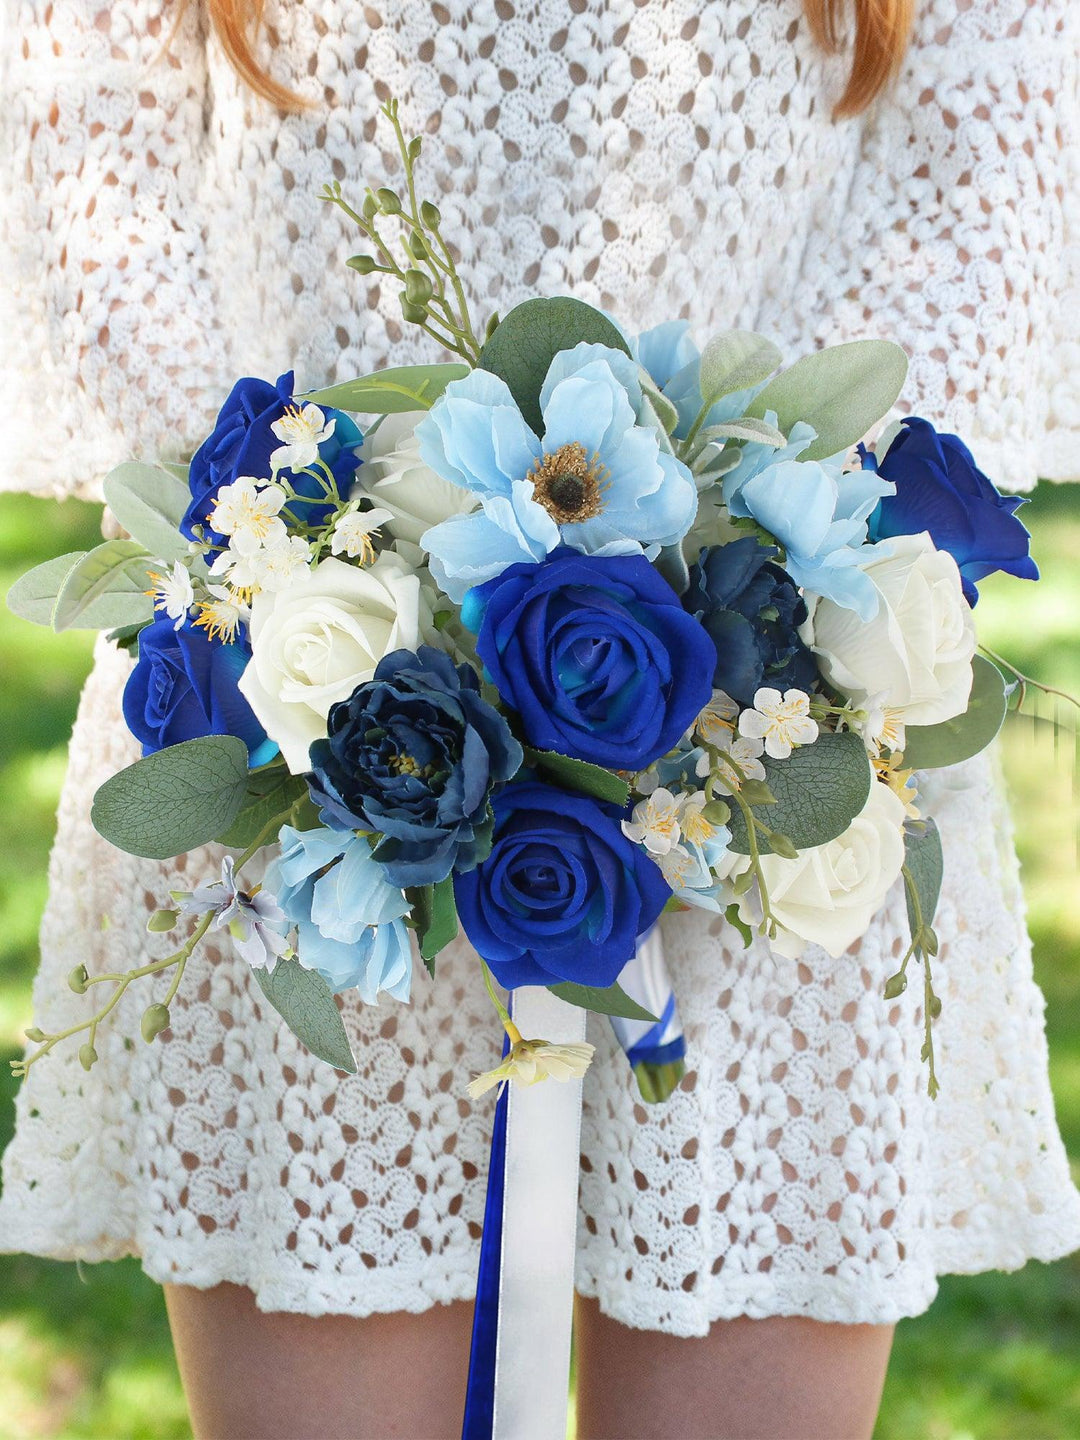 How to Incorporate Bright Colors into Your Summer Wedding Bouquet?